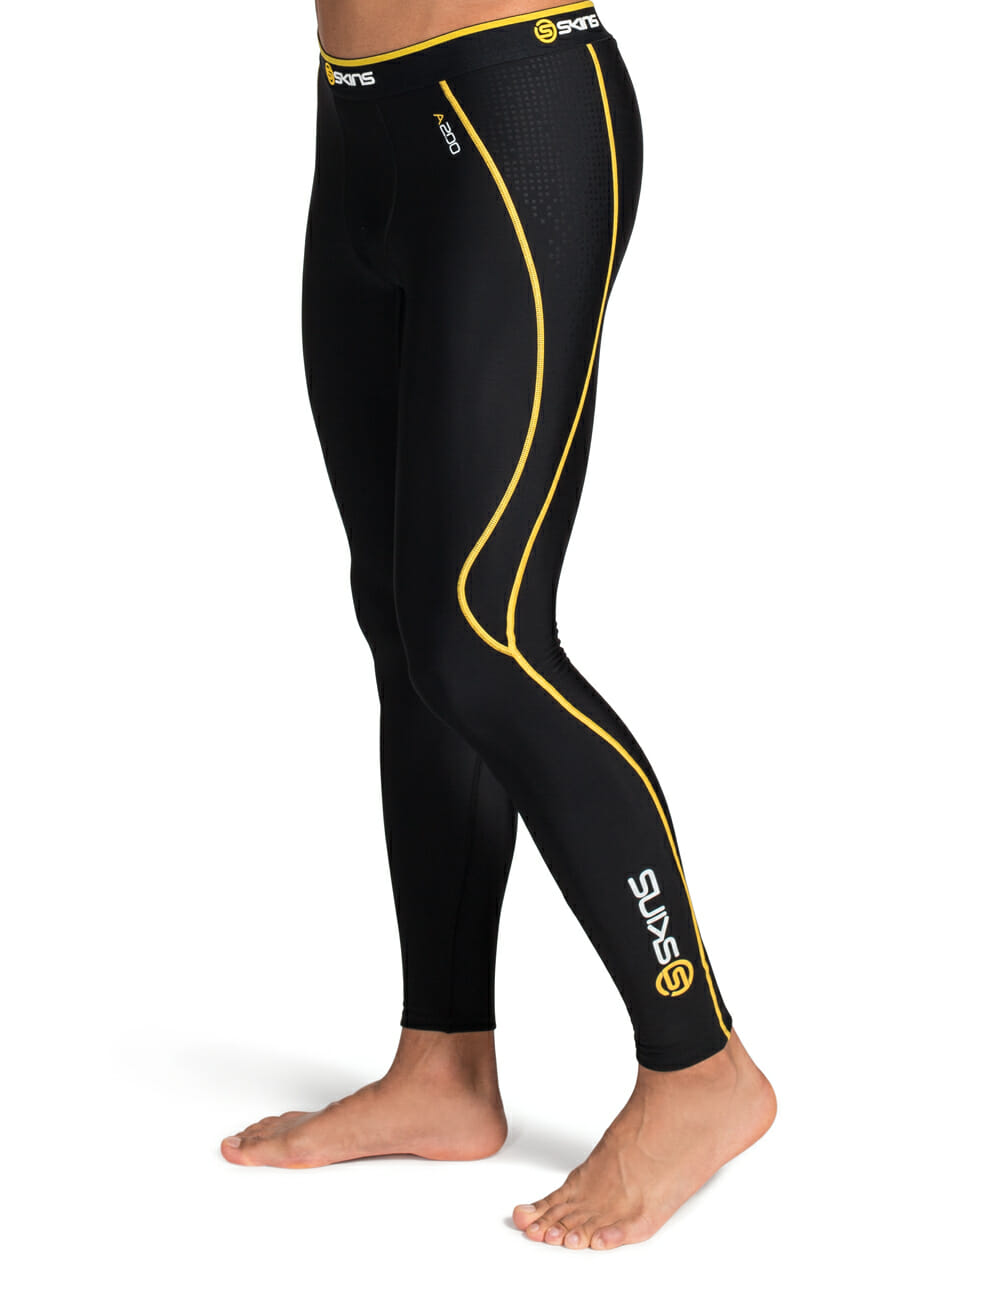 Best thermal running tights and leggings for winter  220 Triathlon